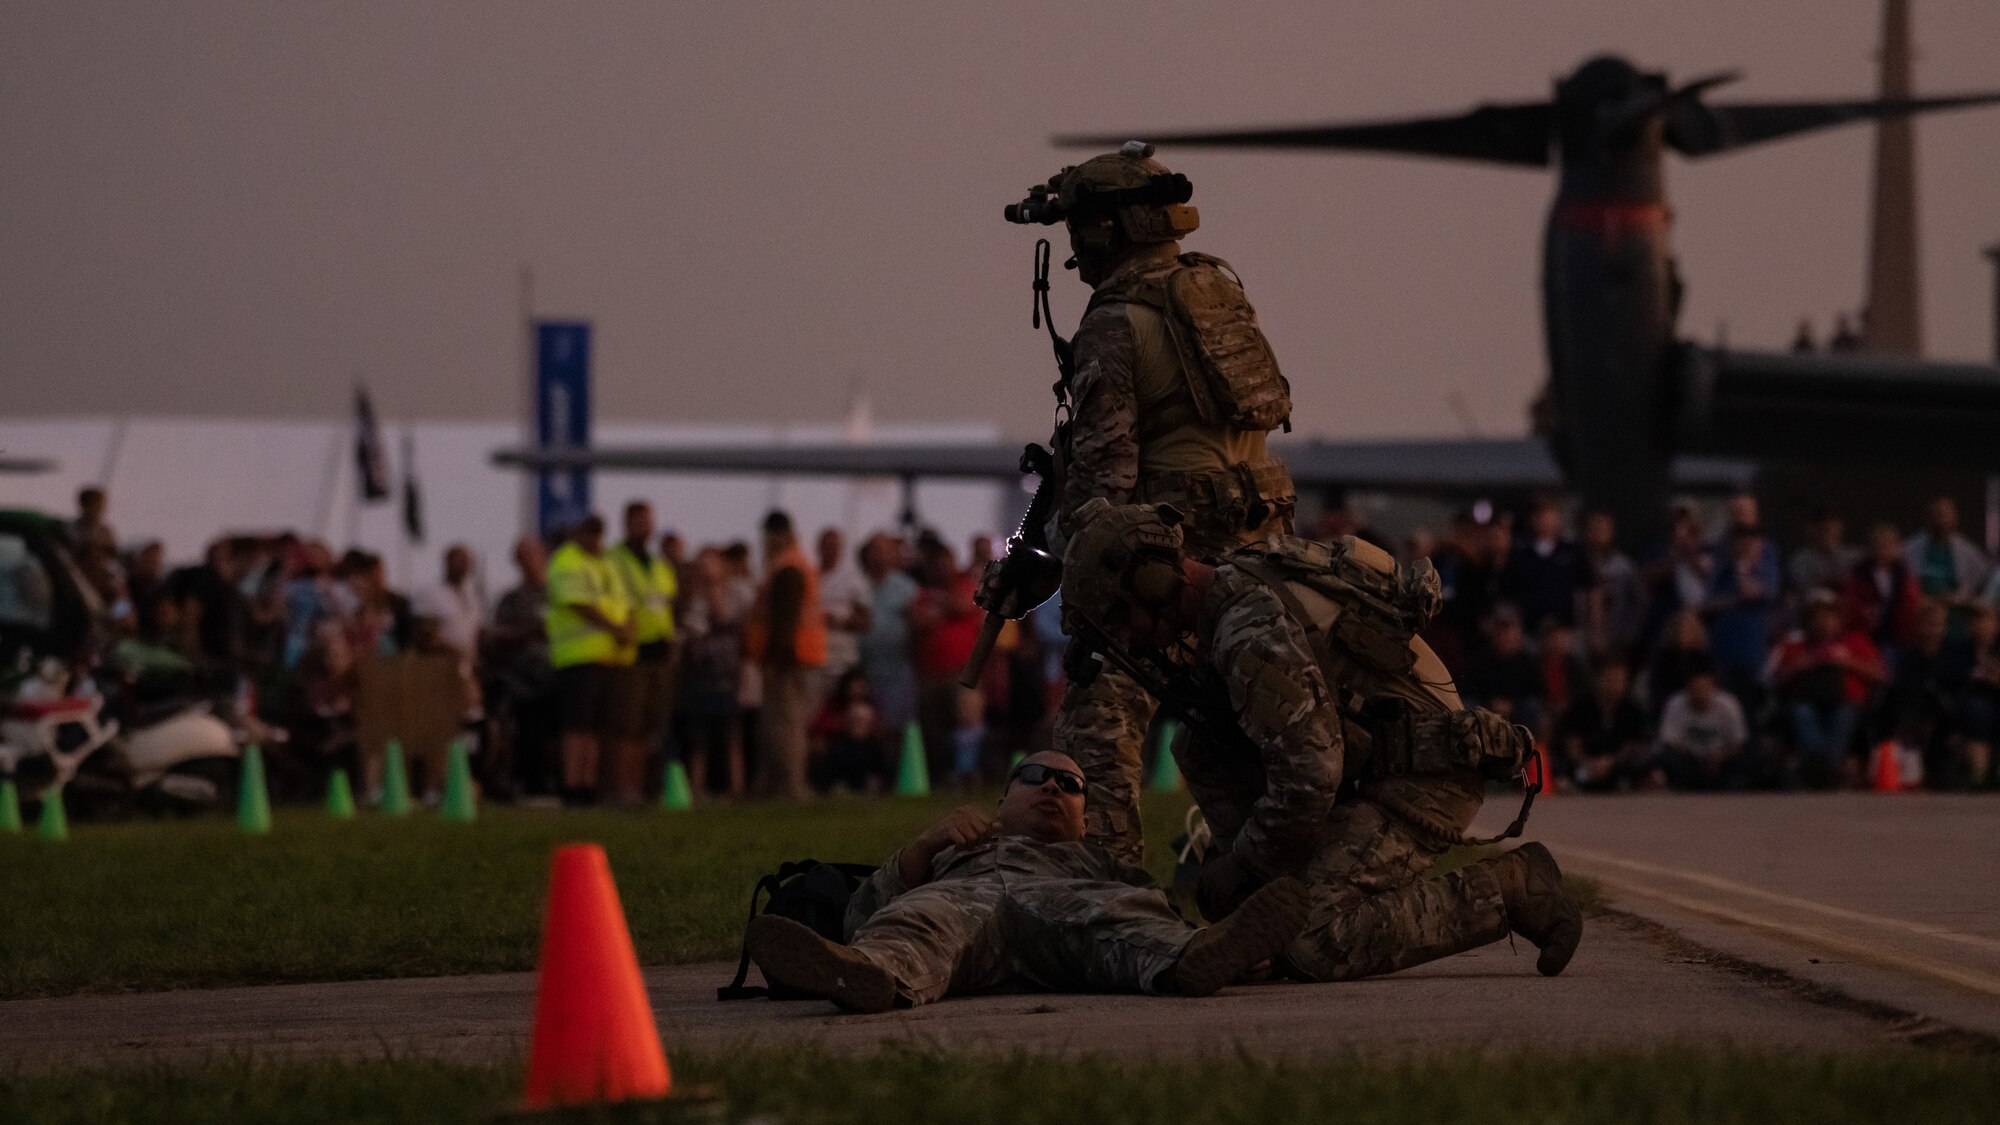 Special Tactics operators simulate rescuing a person in front of a crowd in the distance. The crowd is standing in front of a large V-22 Osprey tilt-rotor aircraft.